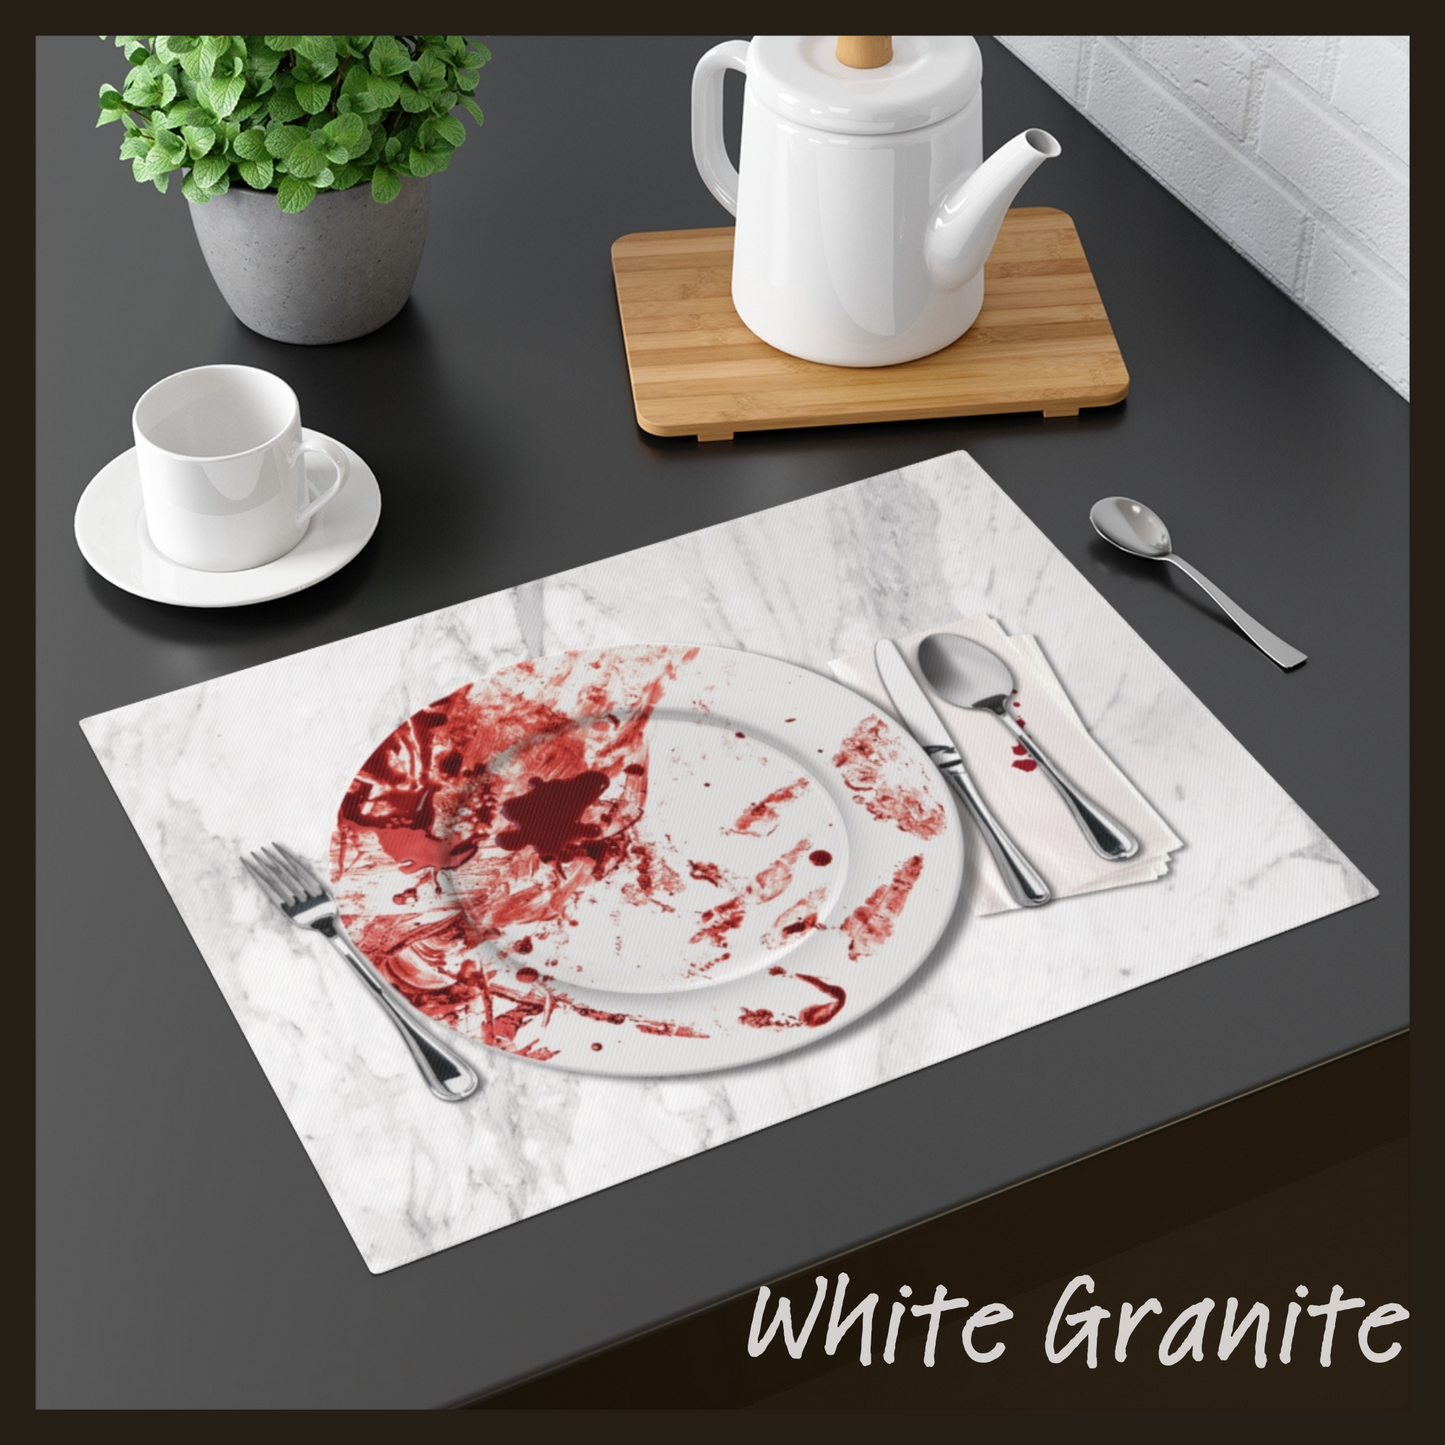 Bloody Good Meal placemat set horror home decor gore placemat bloody dining table decoration horror table linens horror placemat horror gift